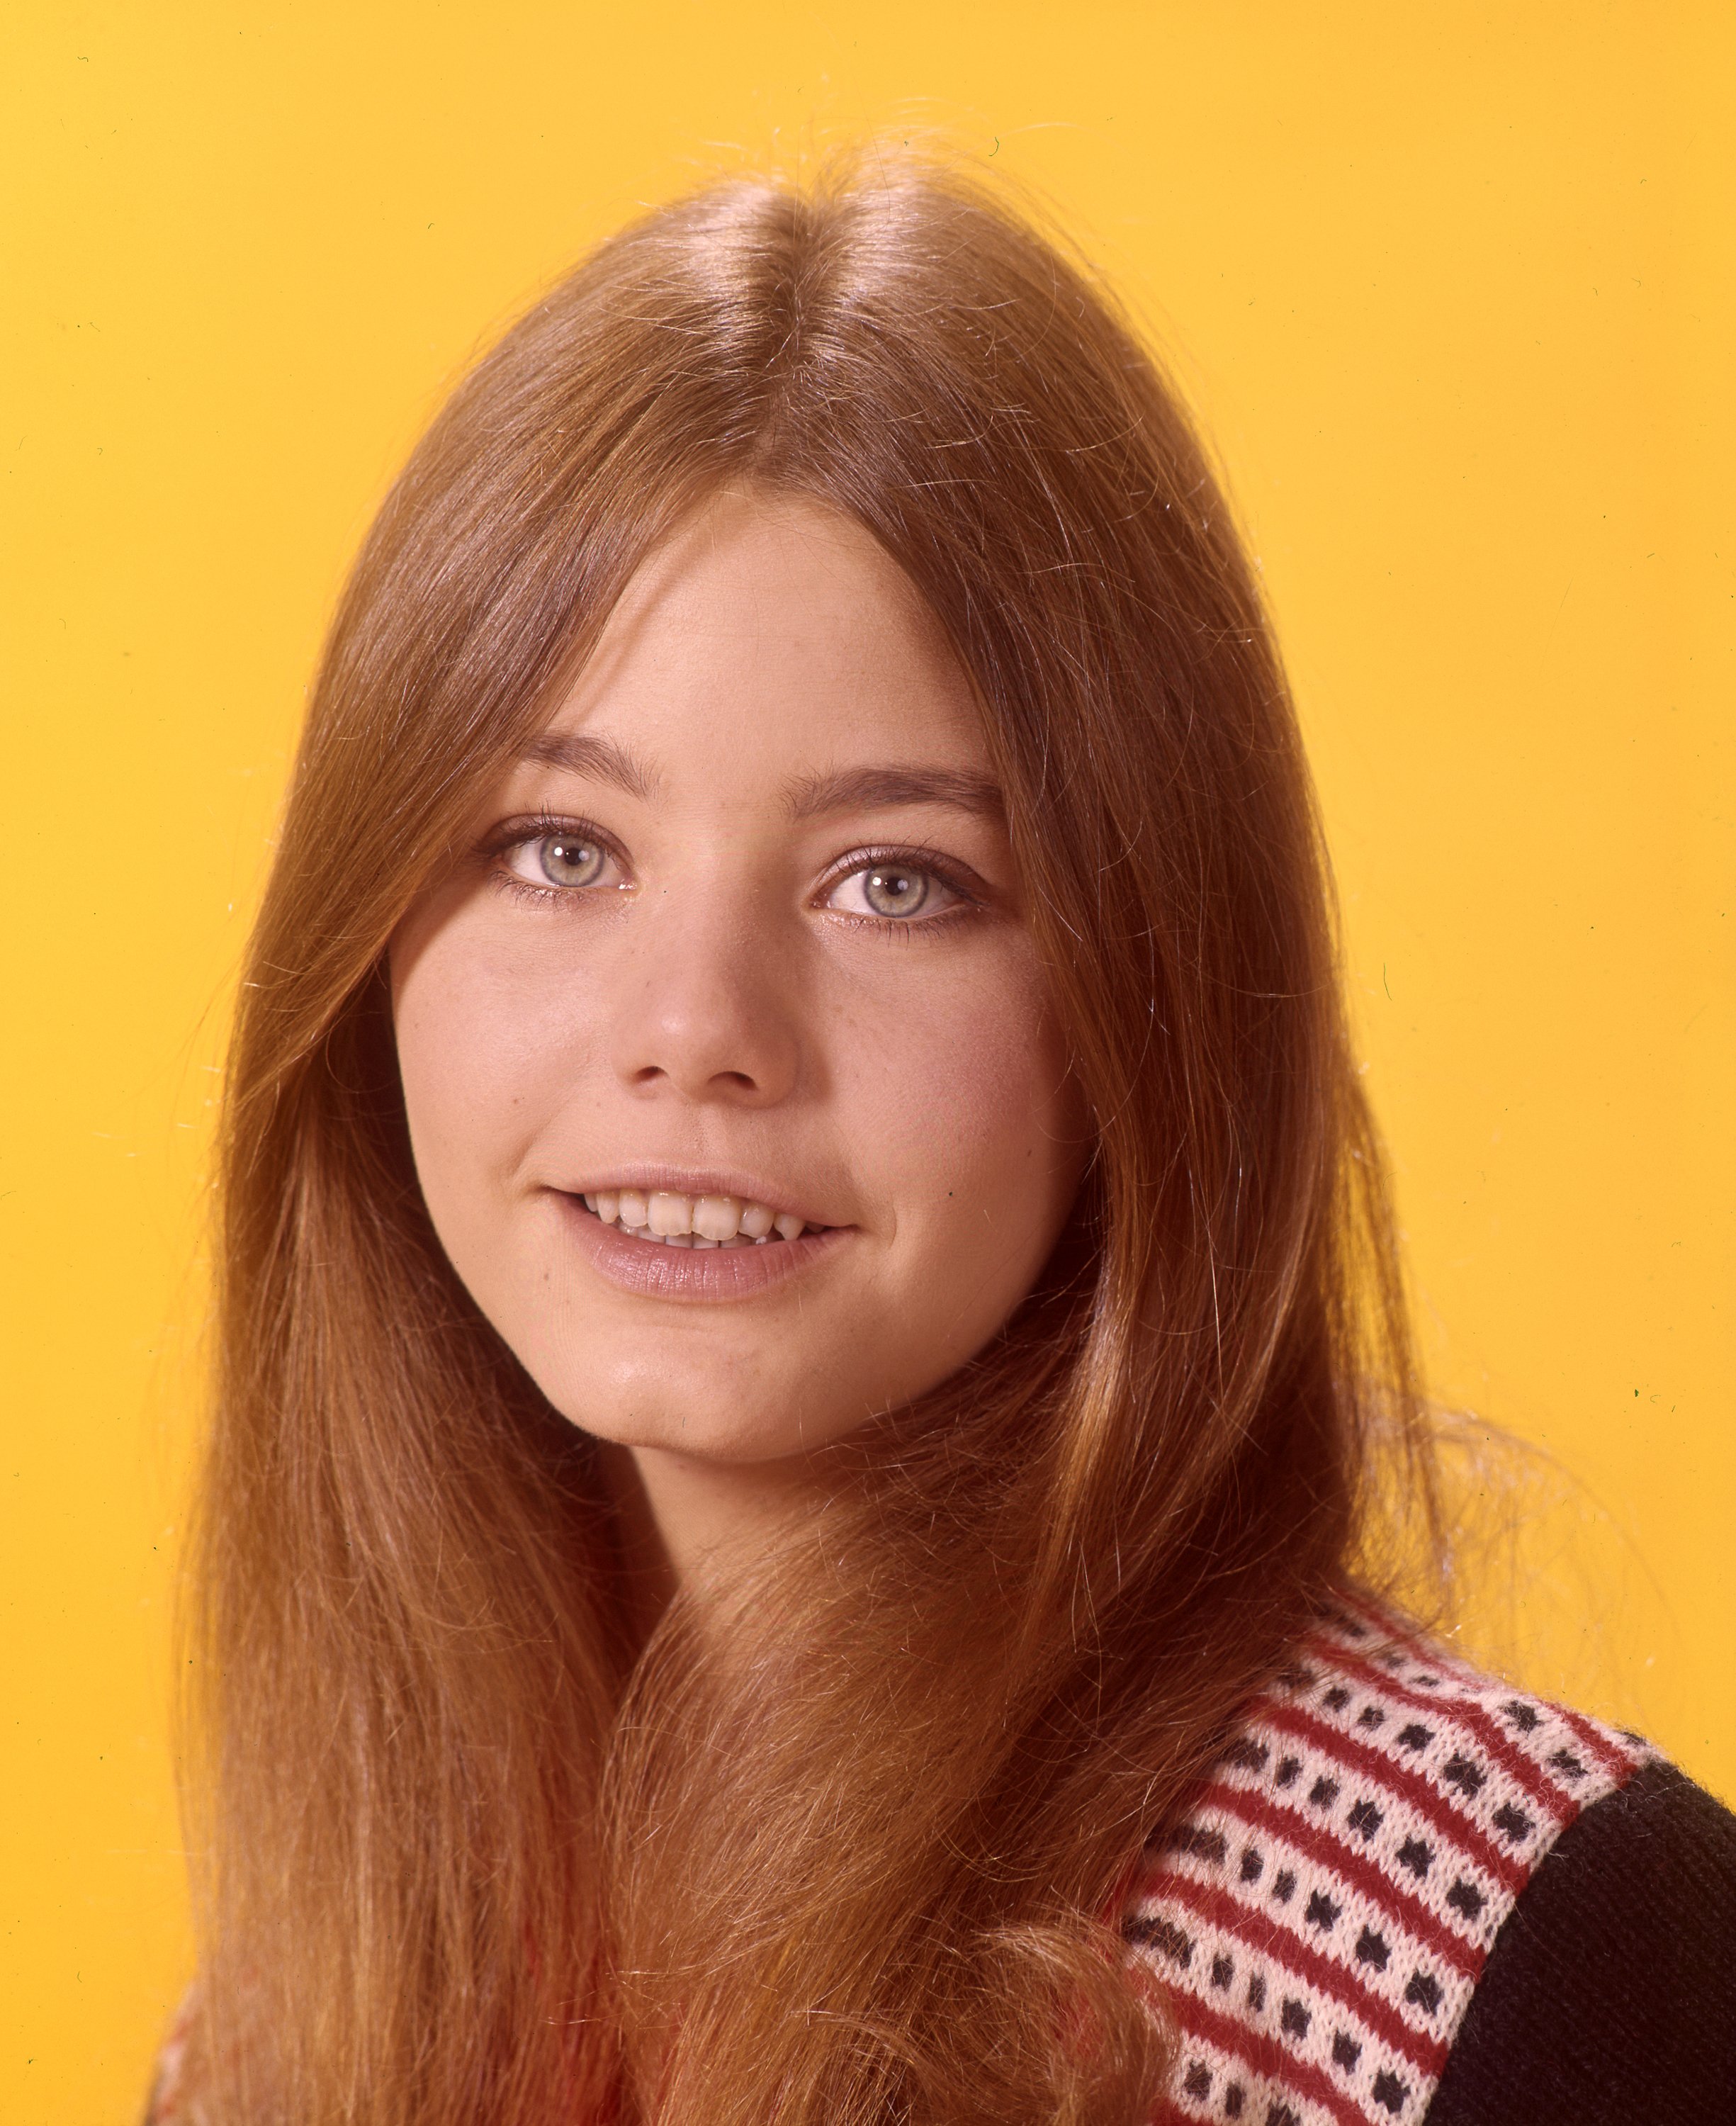 Susan Dey aka Laurie Partridge from "The Partridge Family" | Source: Getty Images